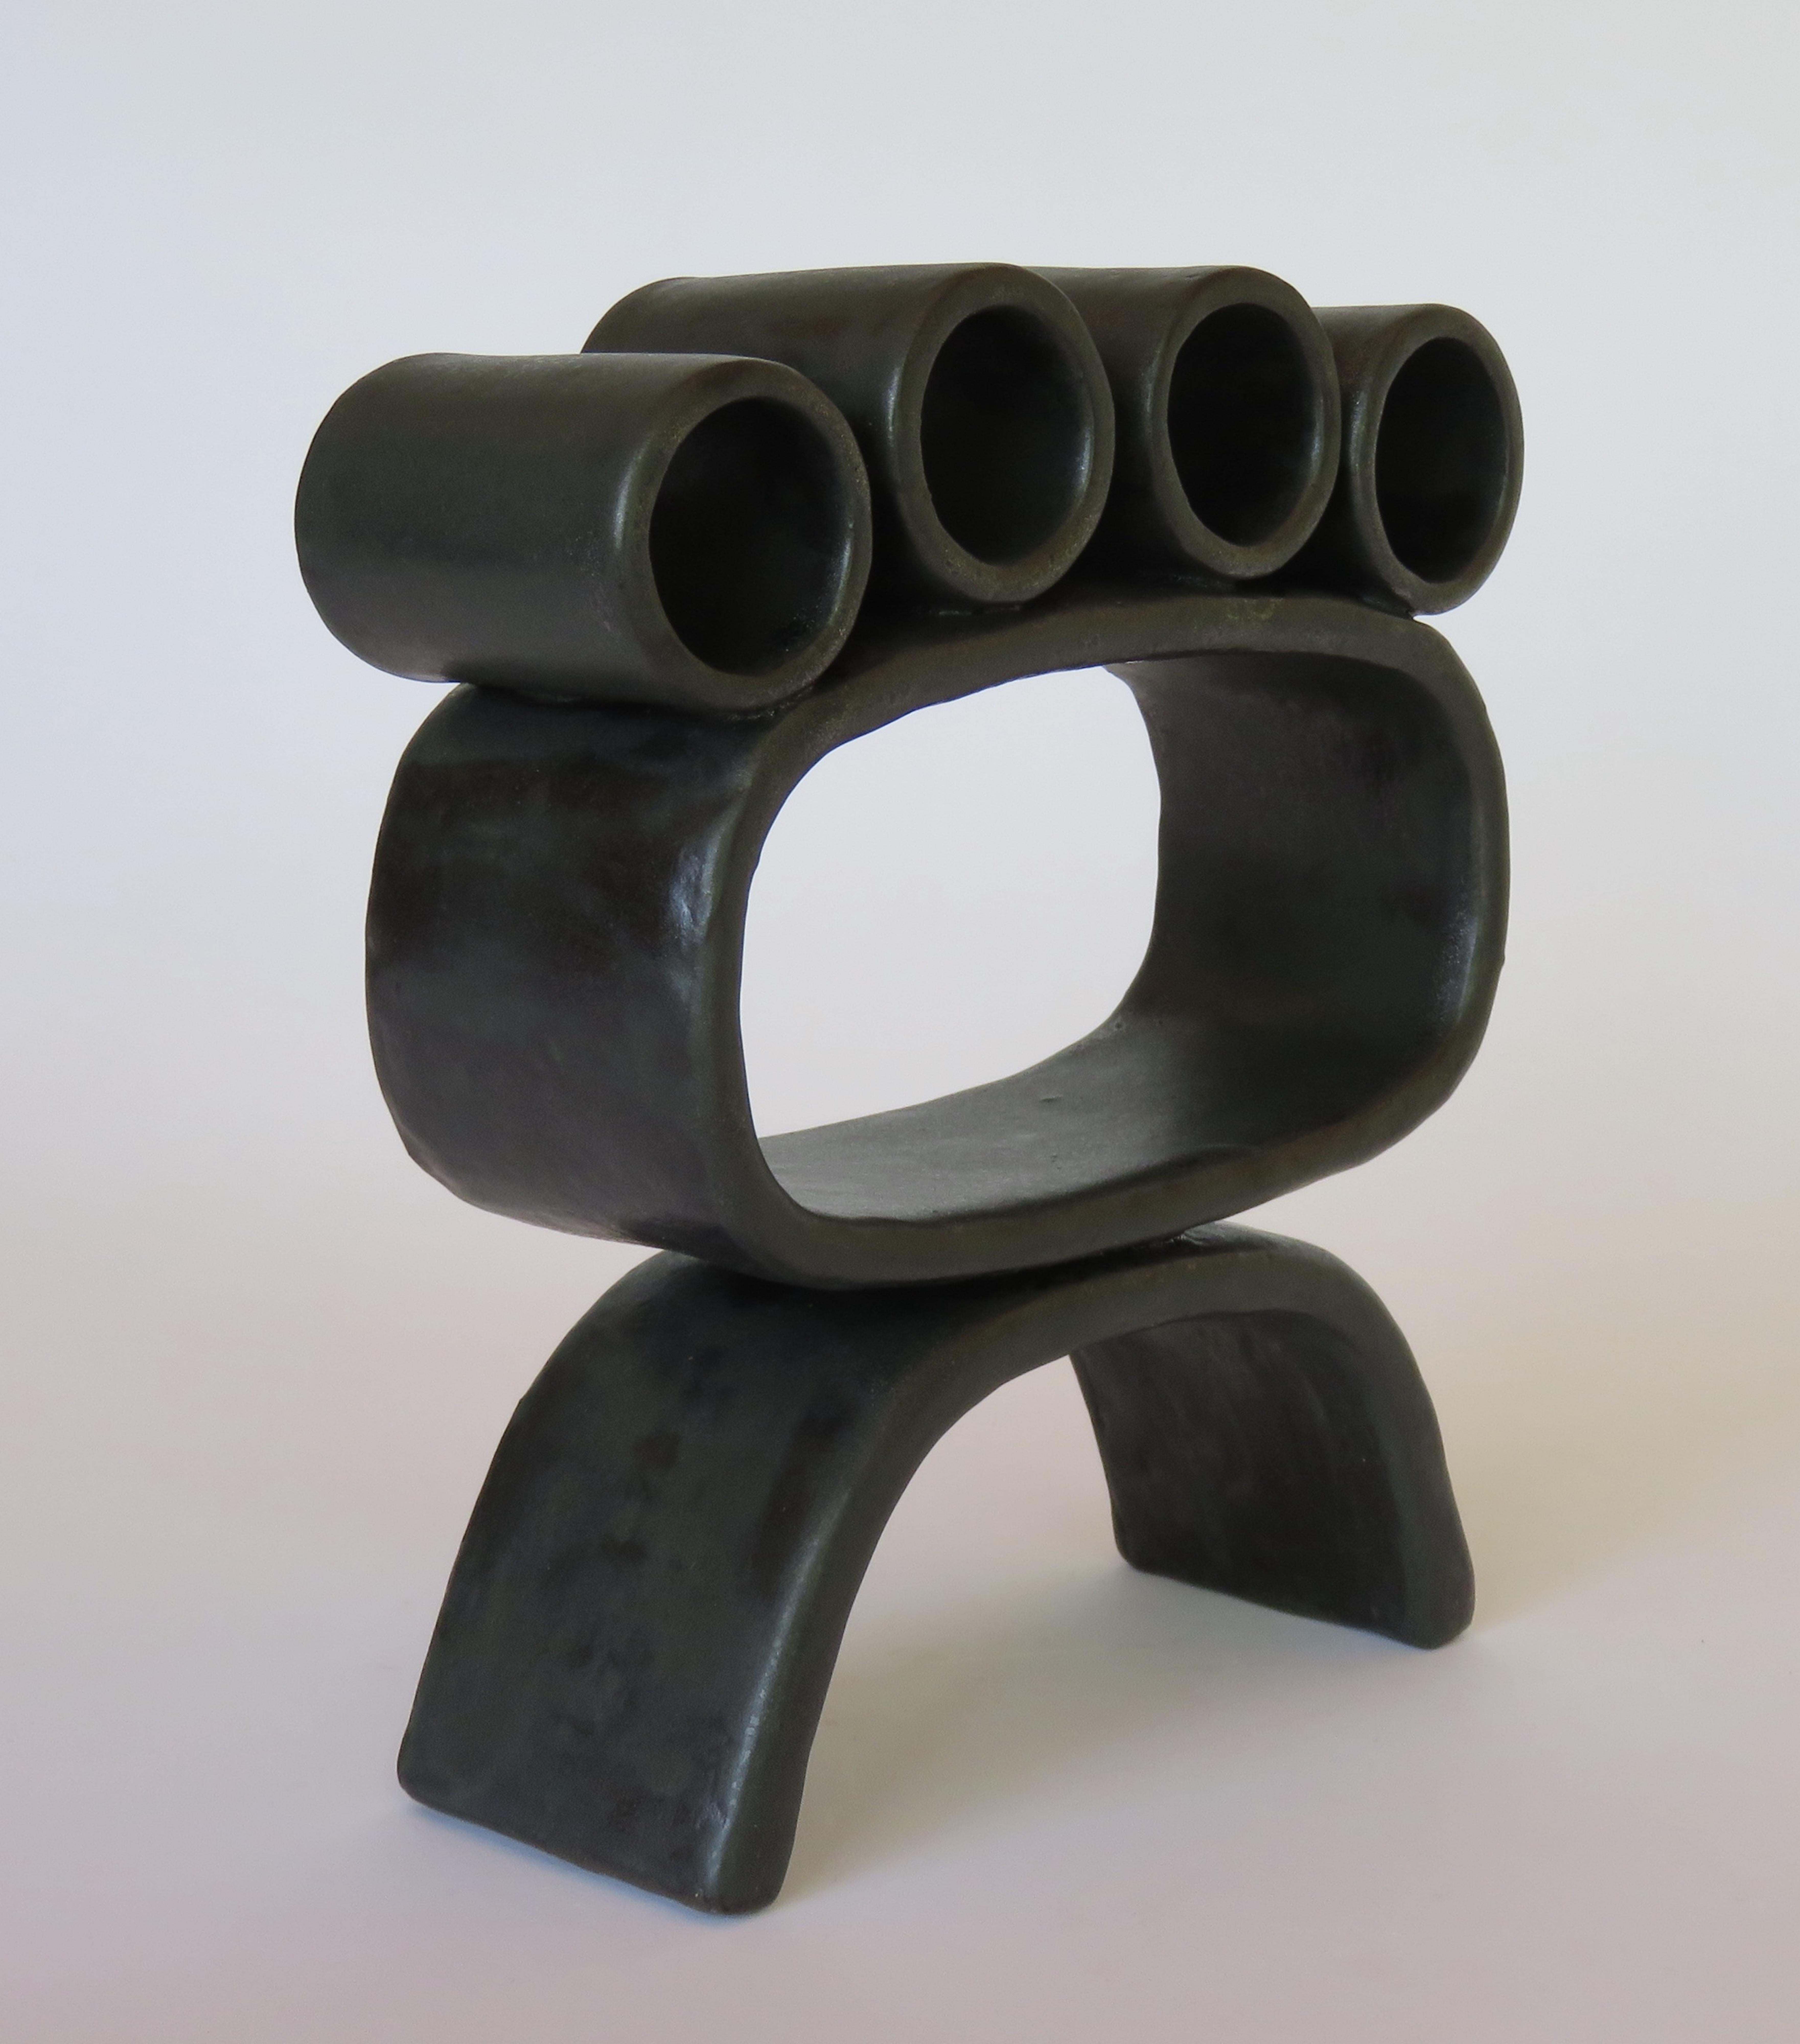 American Metallic Black Hand-Built Ceramic Sculpture with Small Rings on Legs